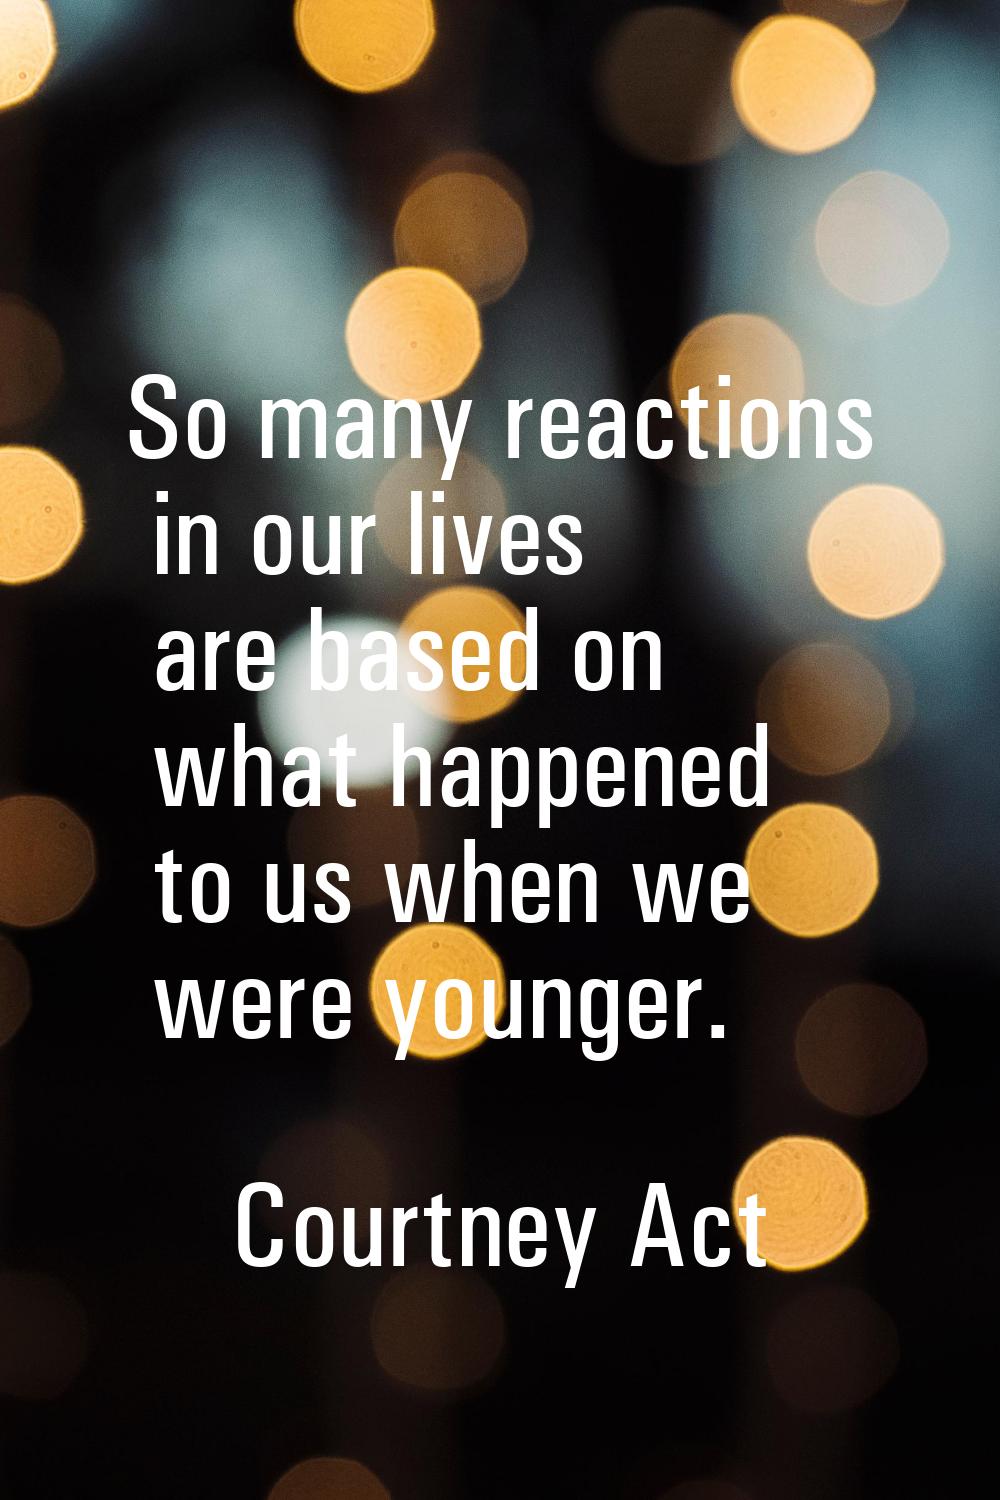 So many reactions in our lives are based on what happened to us when we were younger.